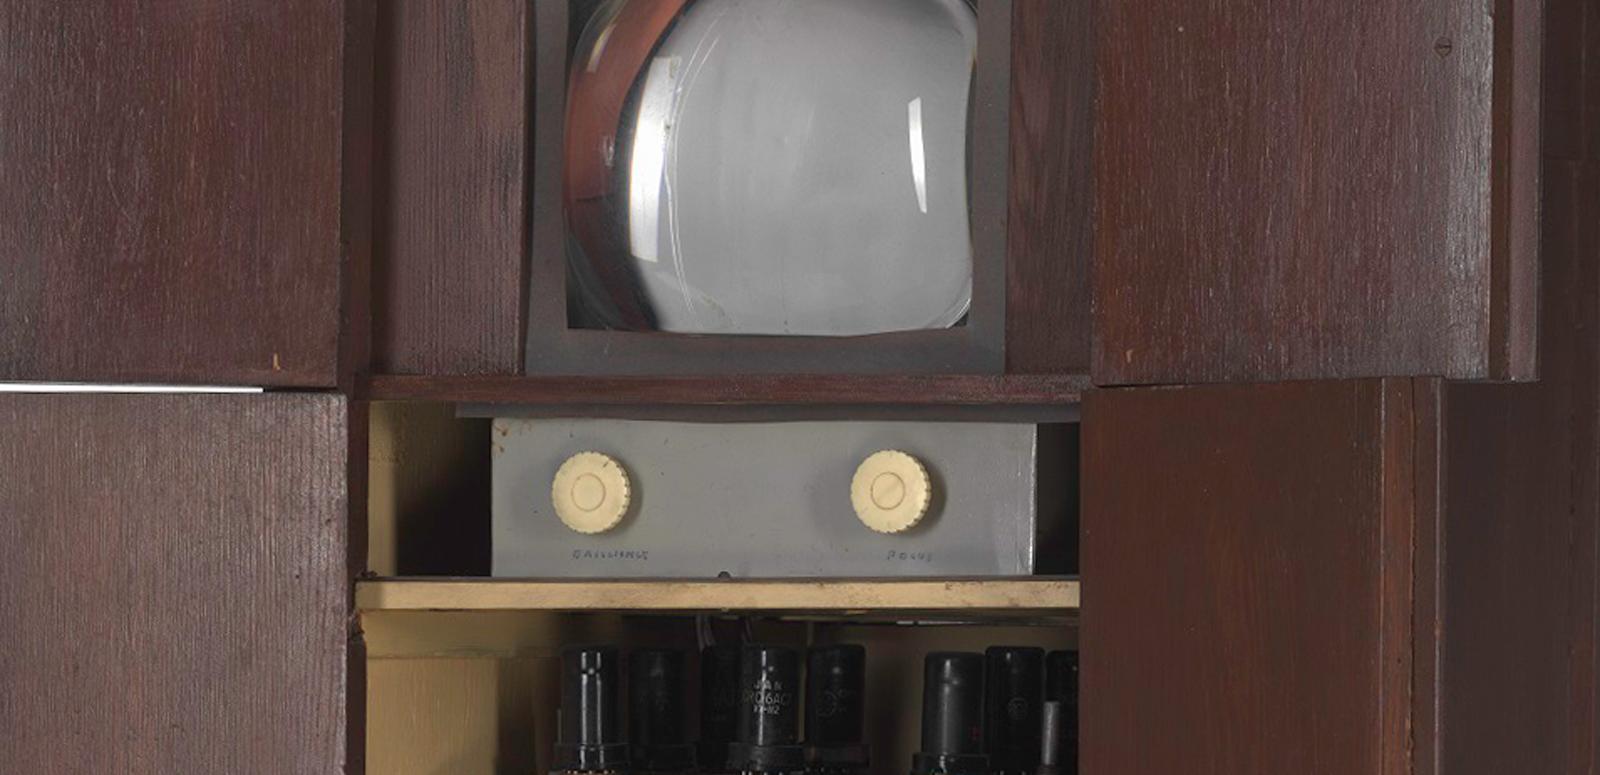 Close up of Sid Oldroyd's homemade TV showing screen and dials inside a wooden cabinet, built in 1956.